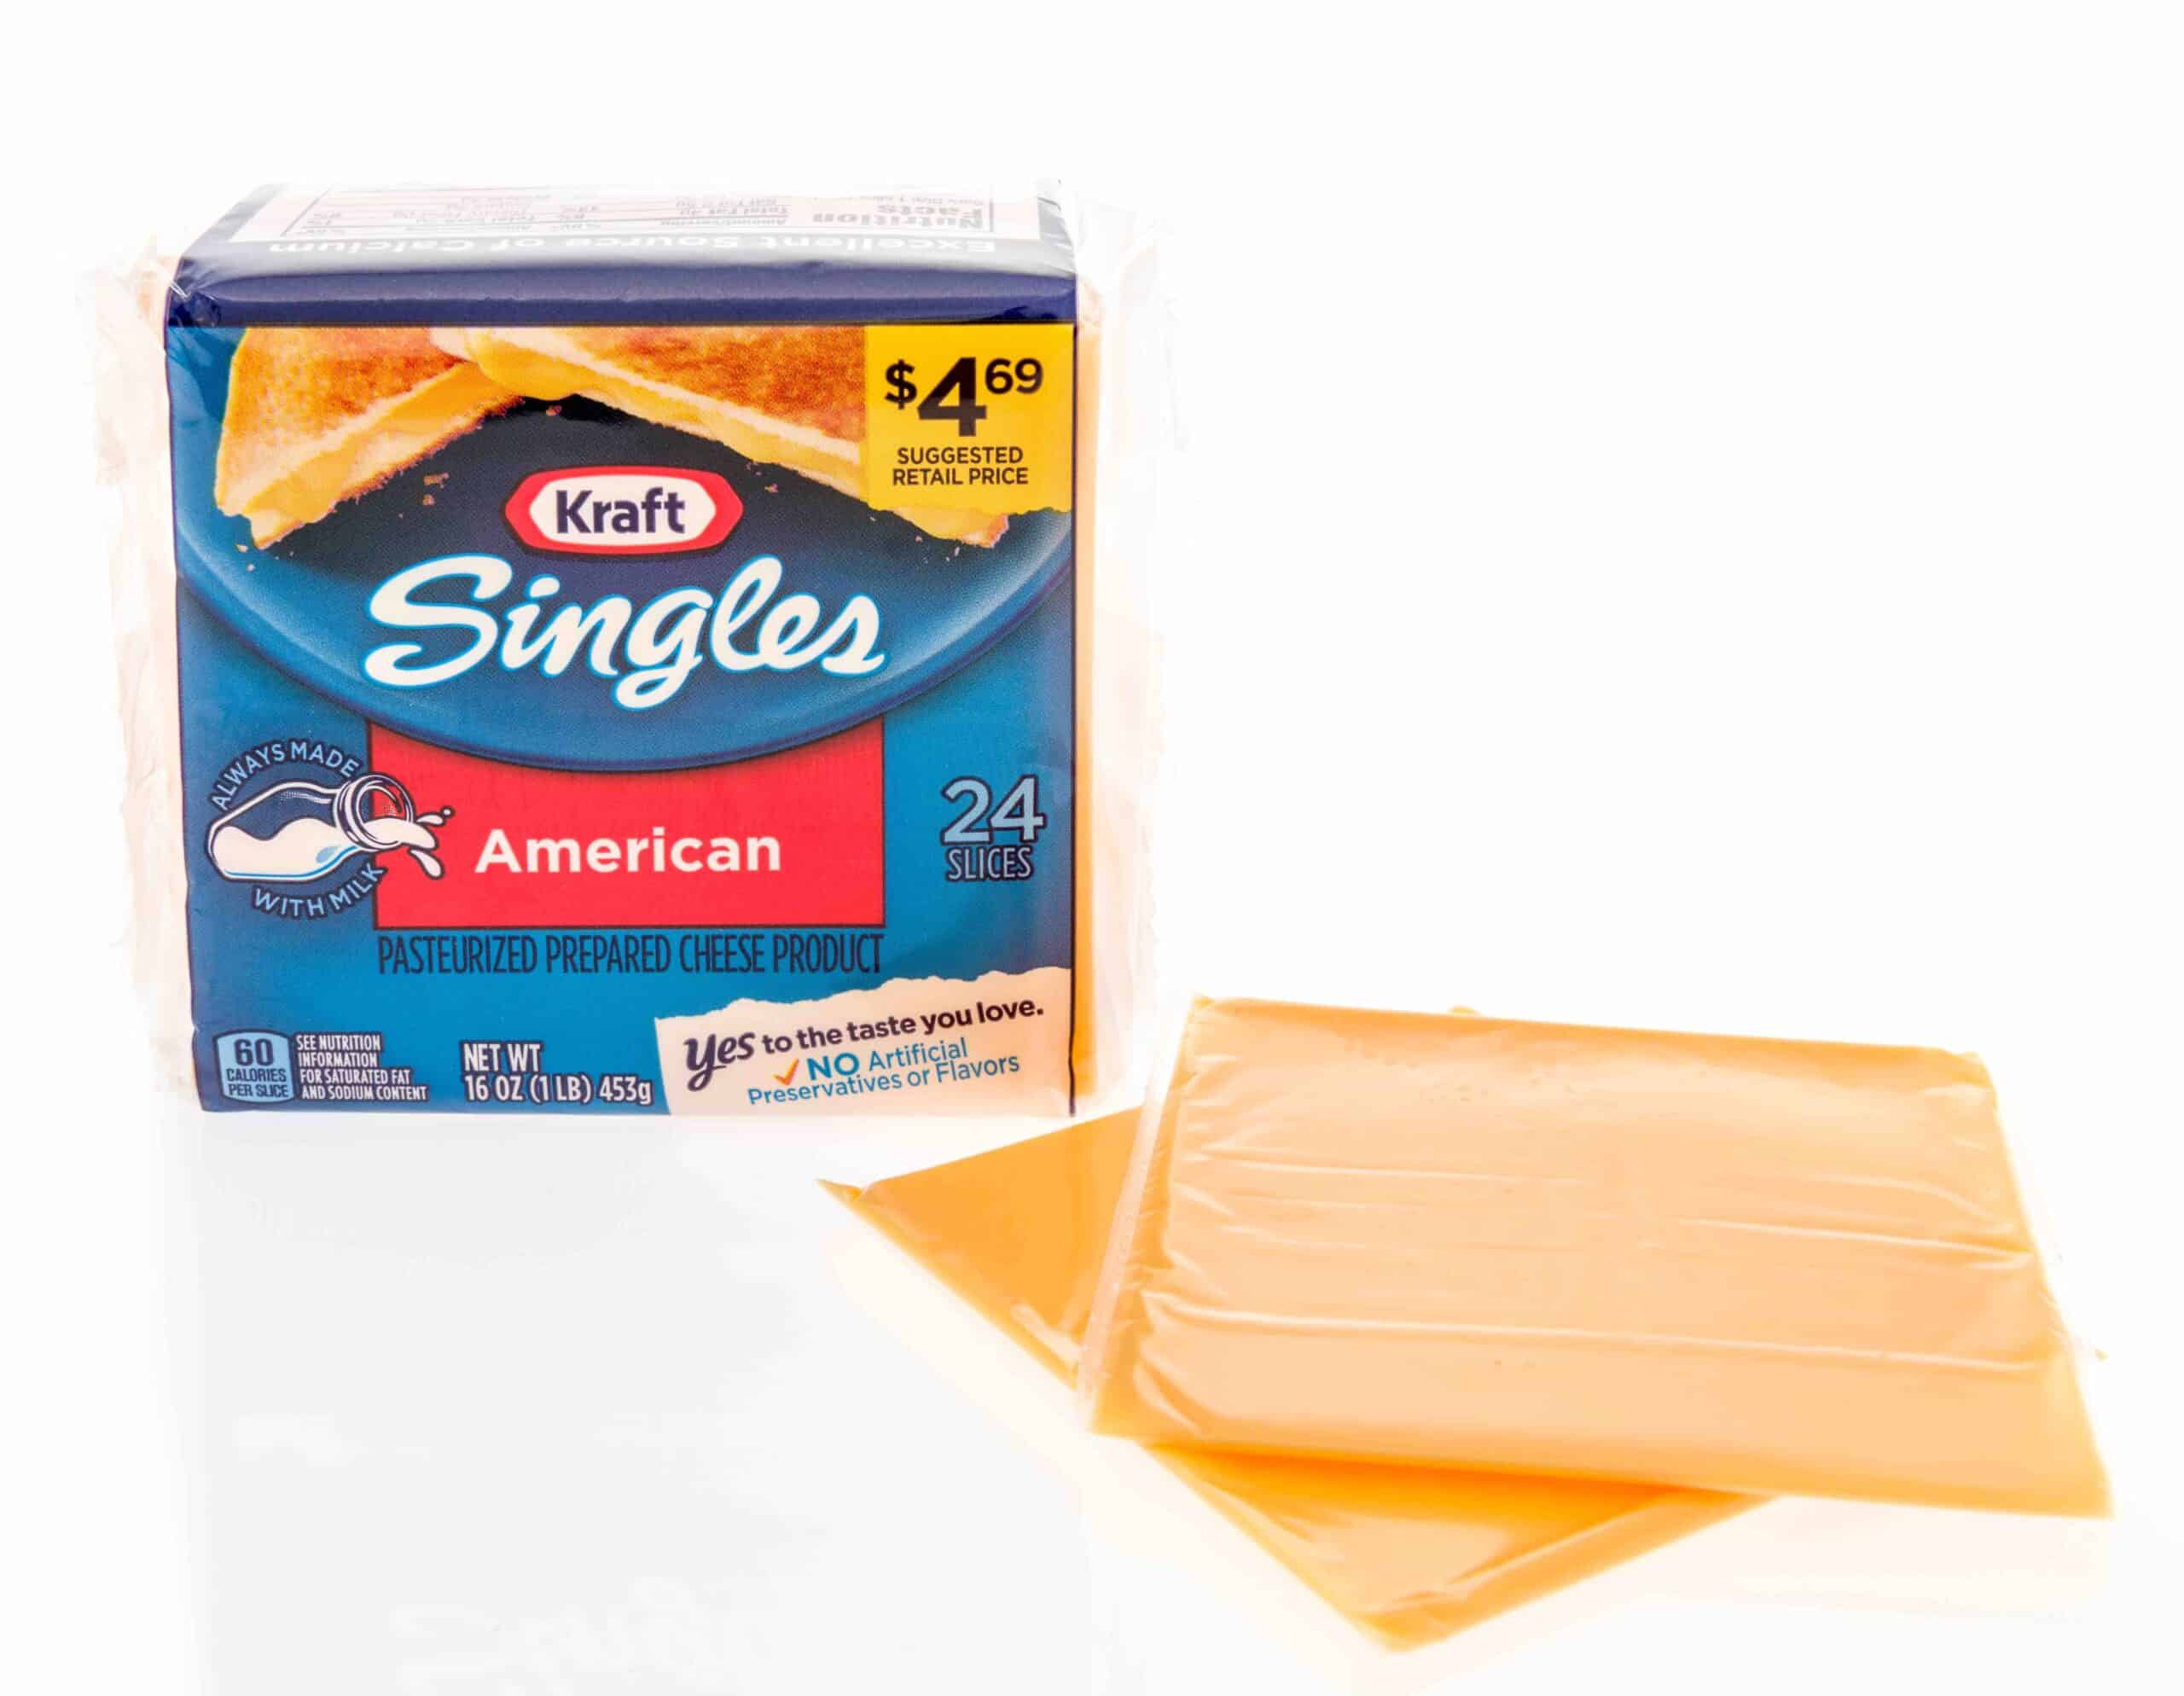  A package of Kraft singles American cheese with cheese slices displayed on an isolated background.